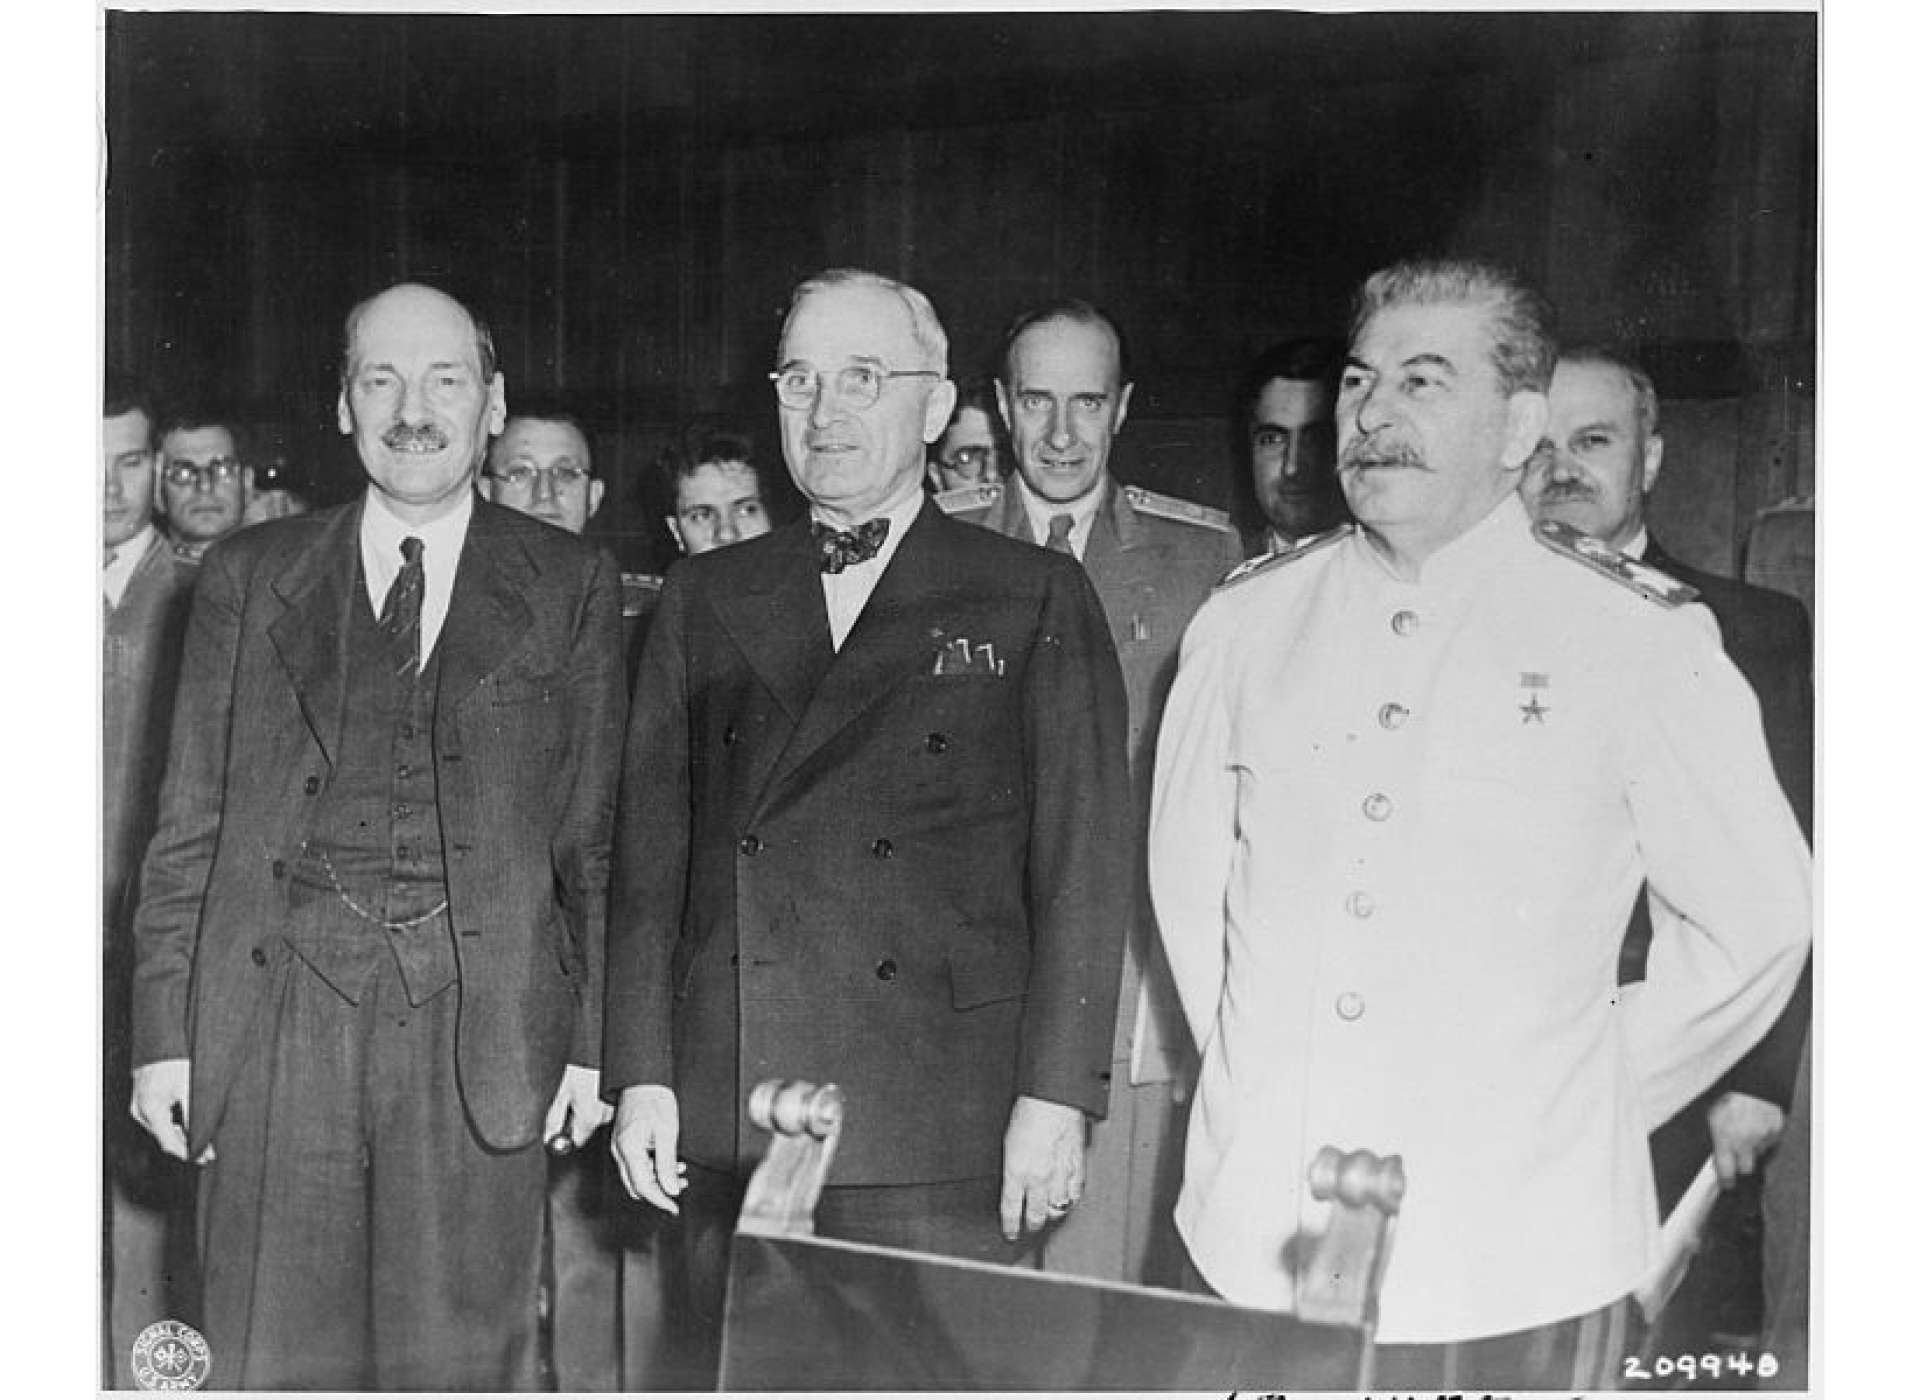 The new &quot;Big Three&quot; meet for the first time at the Potsdam Conference in Potsdam, Germany. Left to right: the new British Prime Minister Clement Attlee, President Harry S. Truman, and Soviet Prime Minister Josef Stalin. “The new Big Three meet for the first time at the Potsdam Conference,” July 29, 1945, National Archives and Records Administration, Office of Presidential Libraries, Harry S. Truman Library, (NAID) 198950.